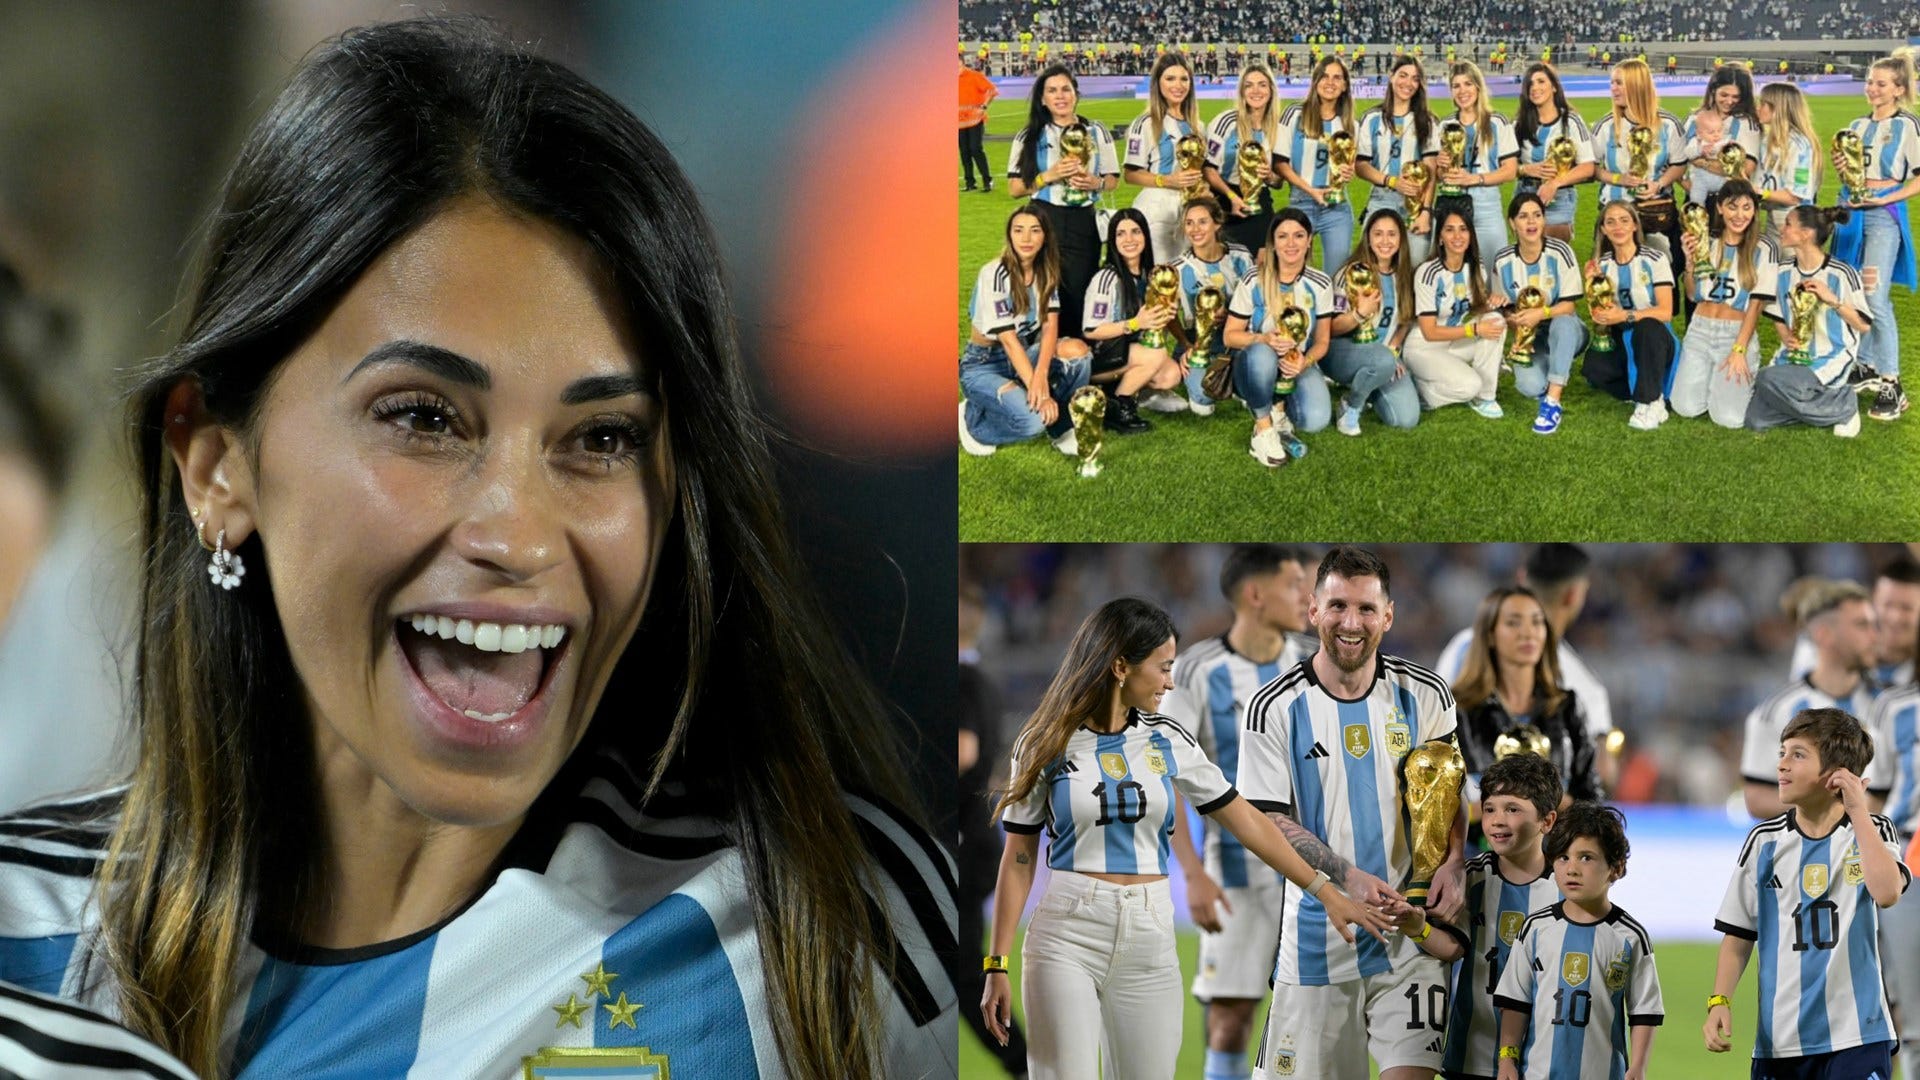 Lionel Messi's wife Antonela Roccuzzo poses in awesome World Cup trophy squad photo with rest of Argentina players' partners